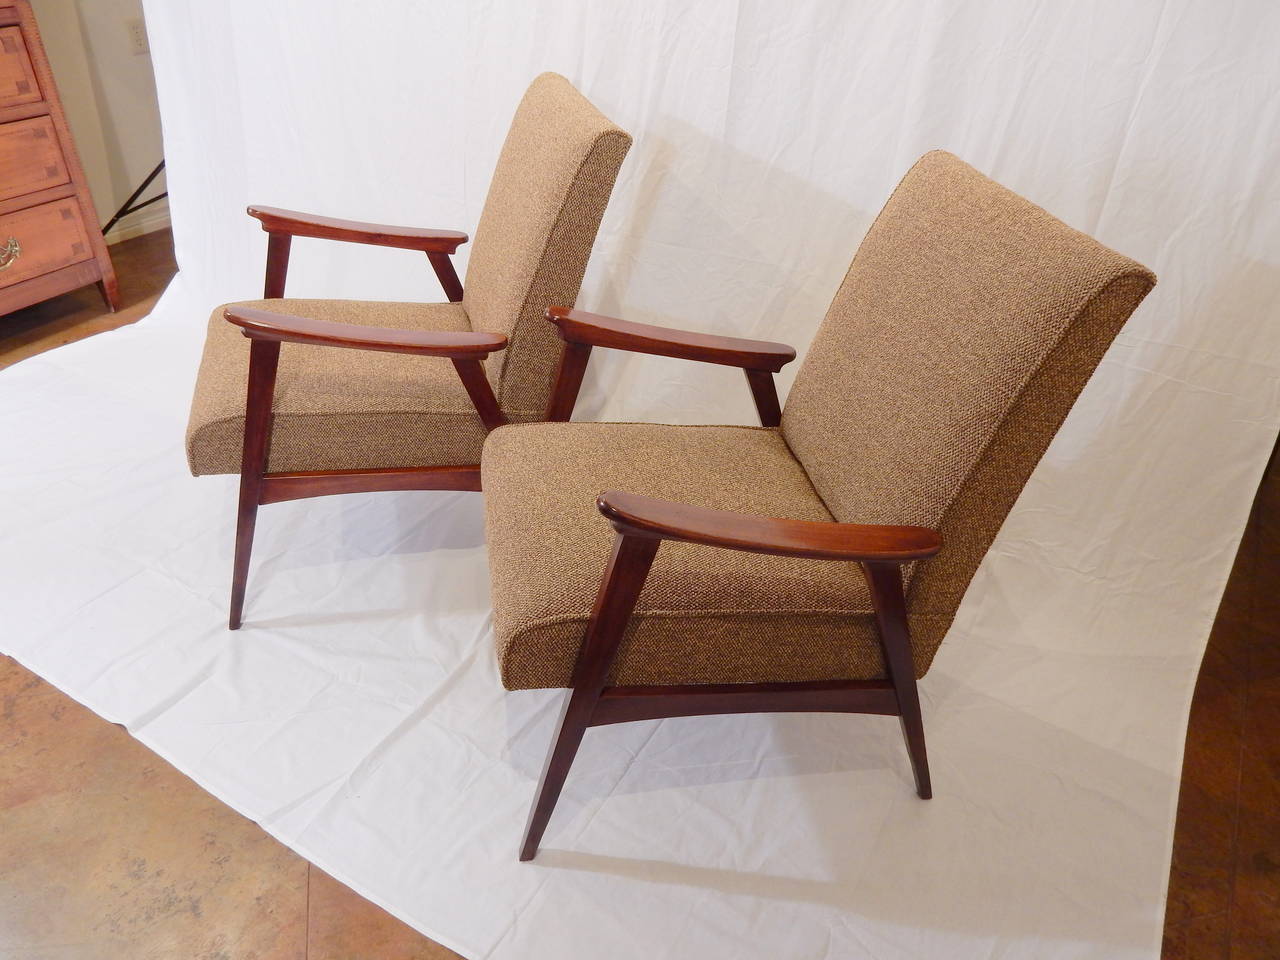 Pair of vintage armchairs, French, 1950s. New fabric, webbing and foam. Carefully restored.